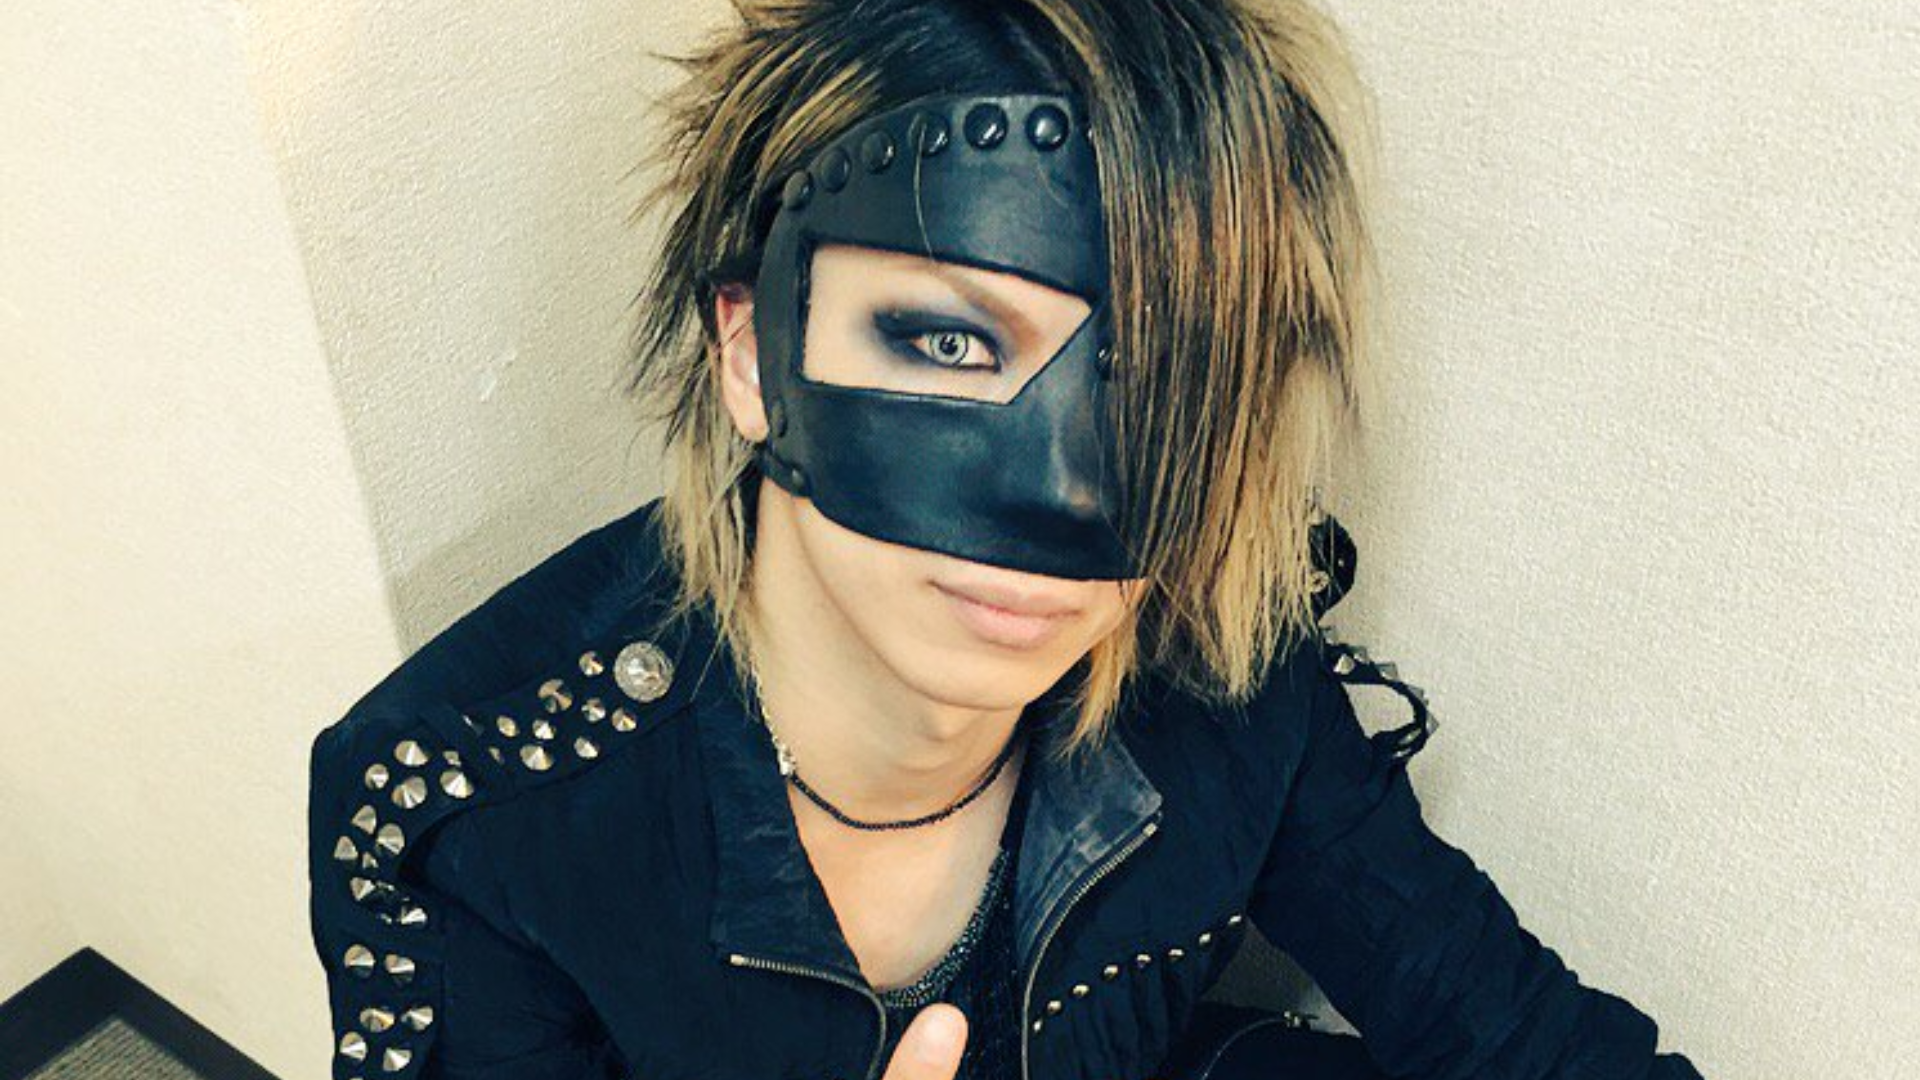 The sudden death of Reita from Japanese rock band The GazettE